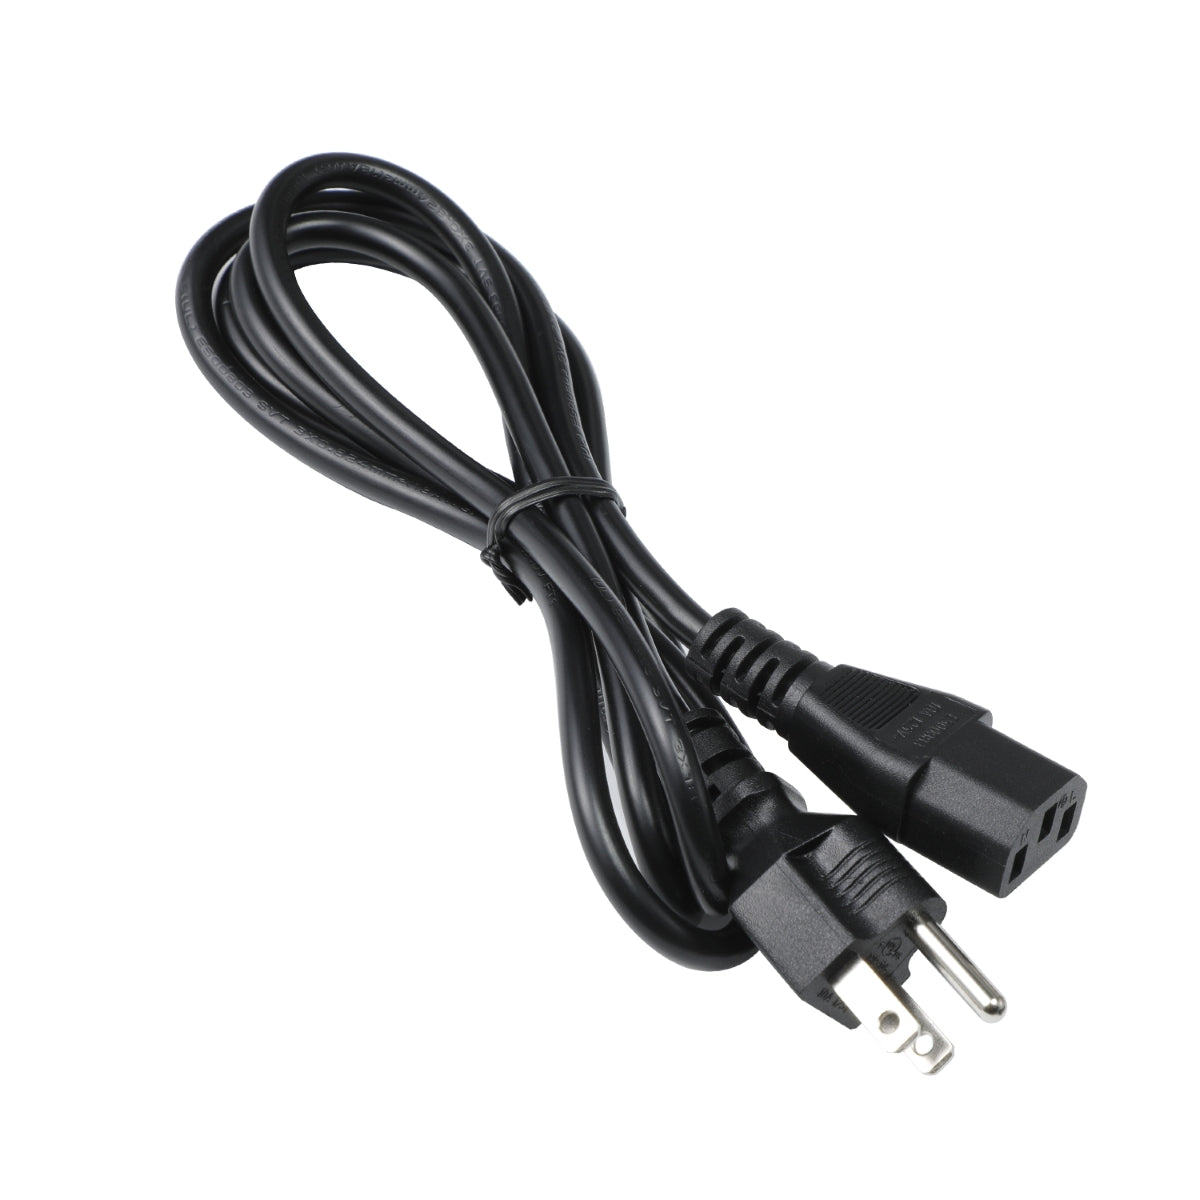 Power Cord for Acer UT241Y Touch Monitor.